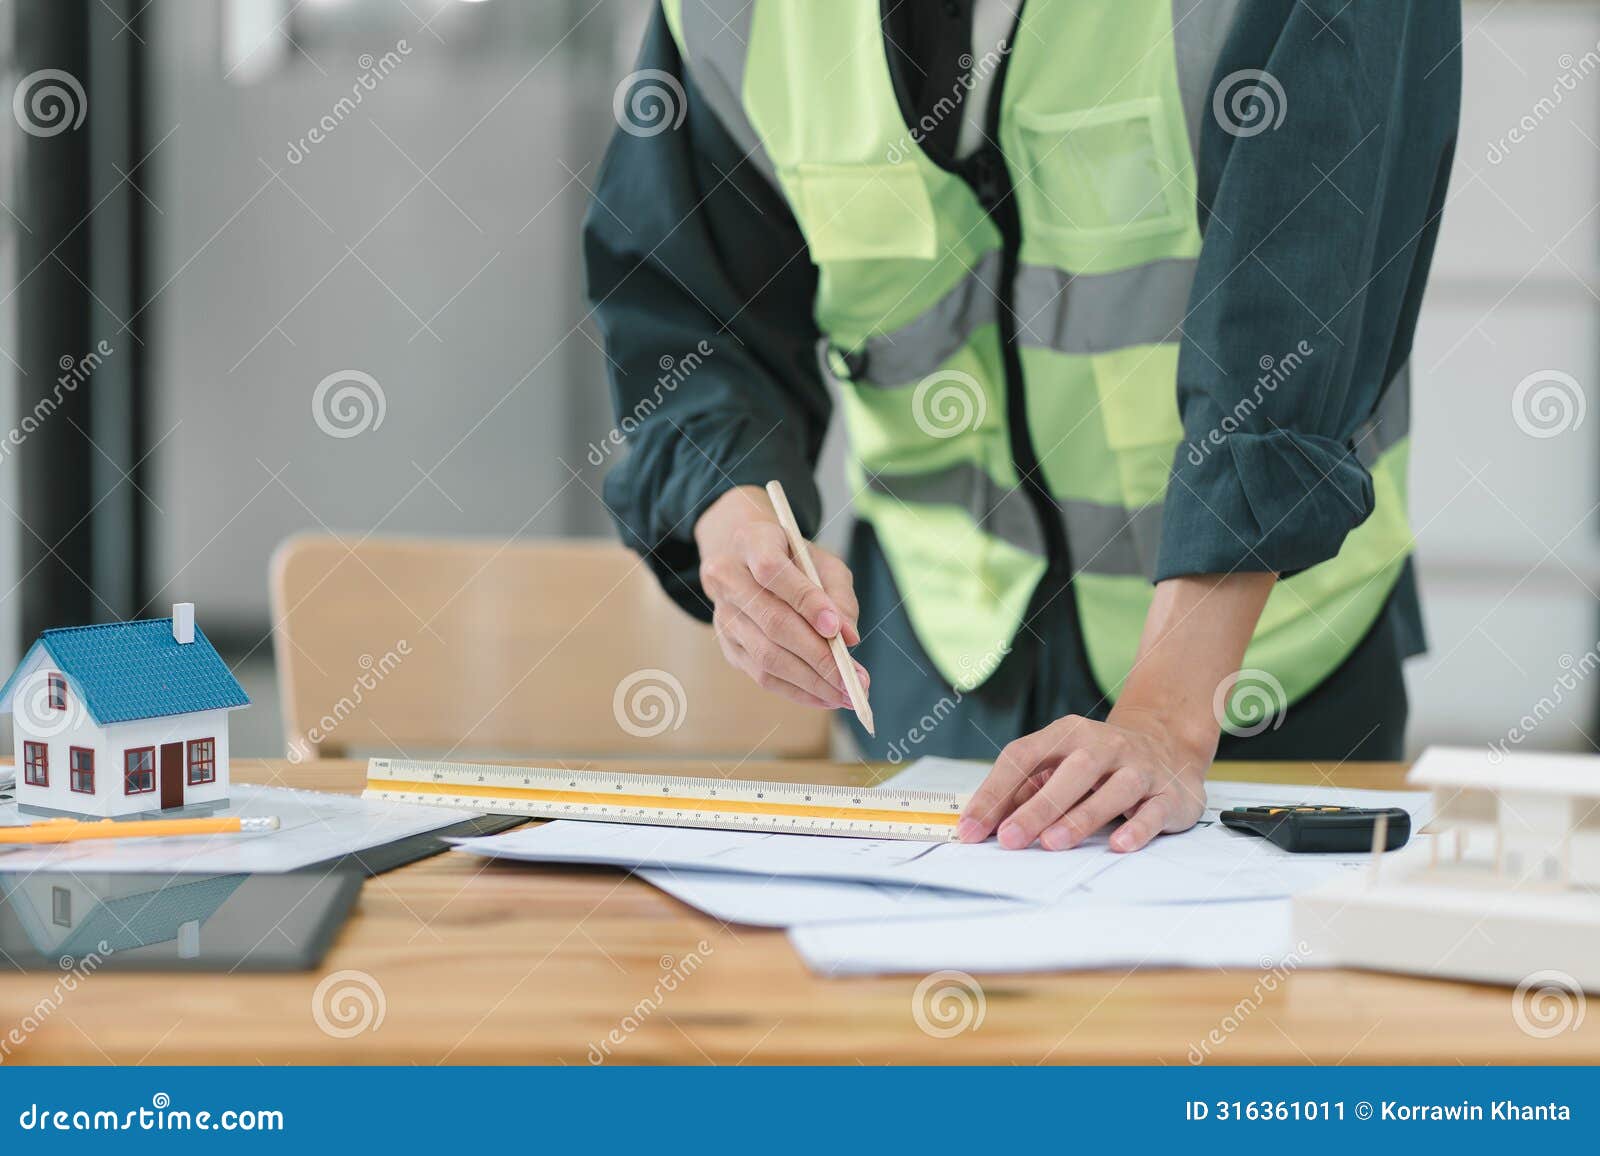 professional male construction engineer reviewing blueprints on worksite.